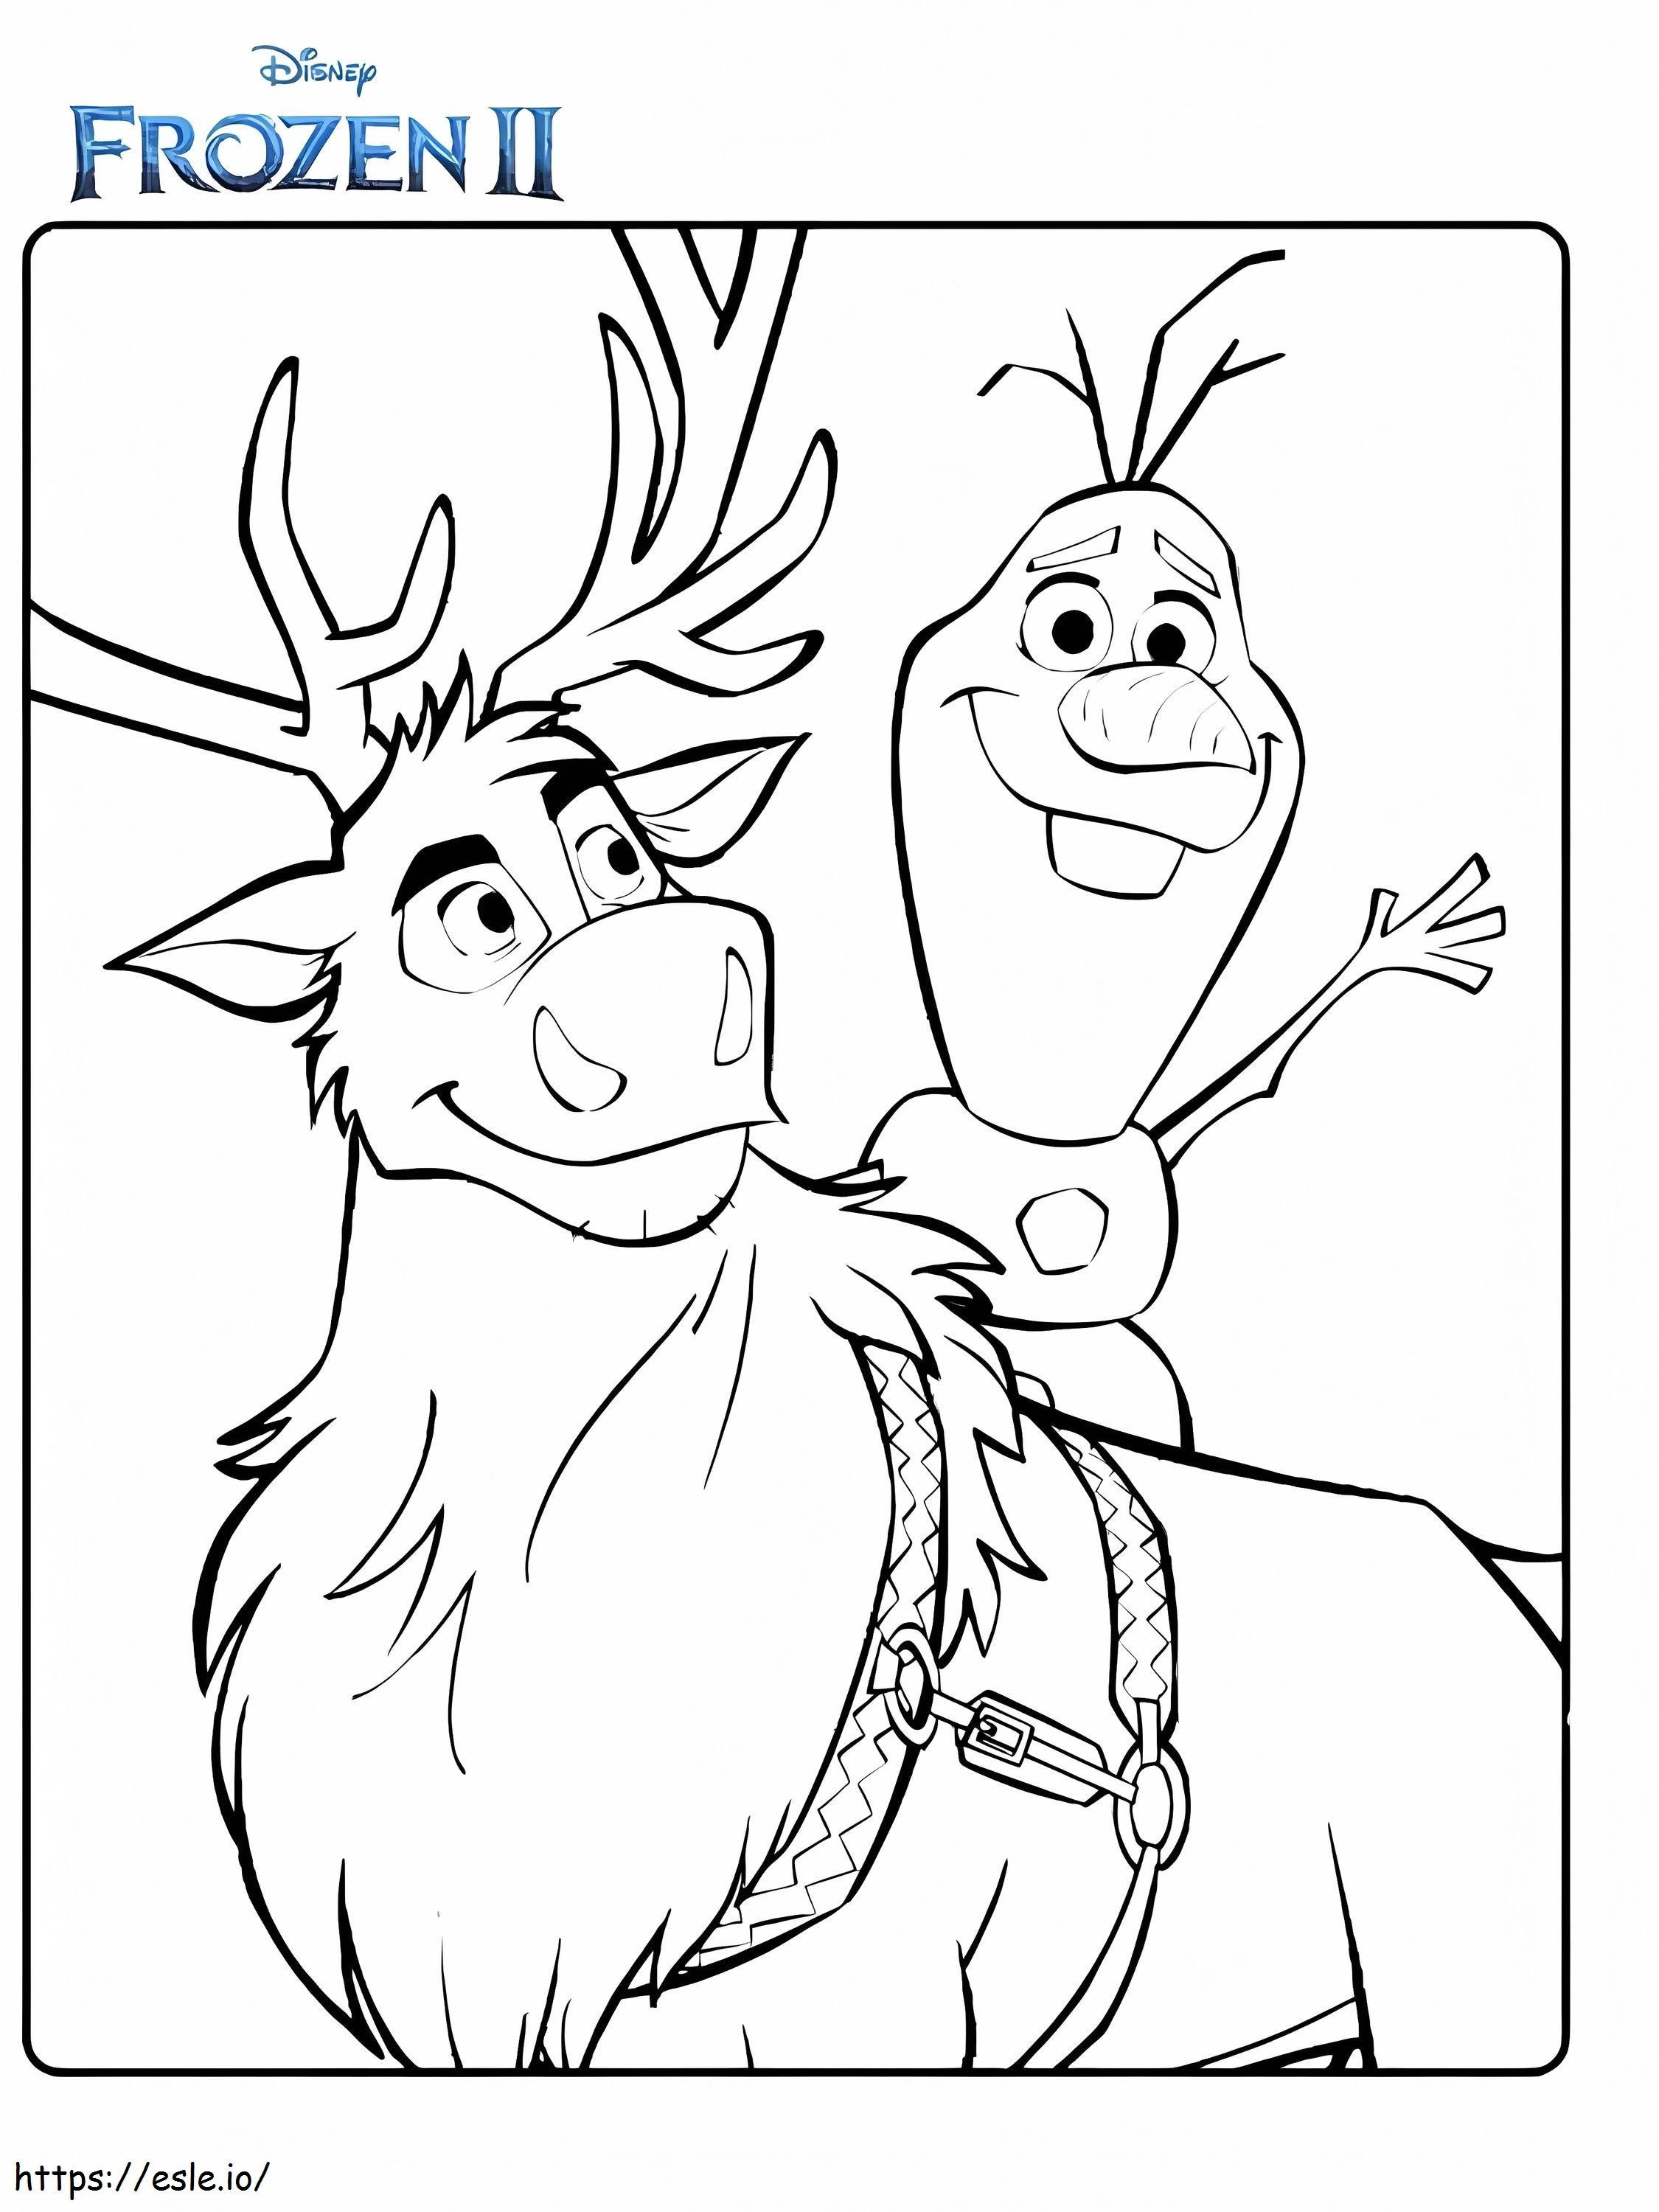 Olaf And Sven Frozen 2 coloring page